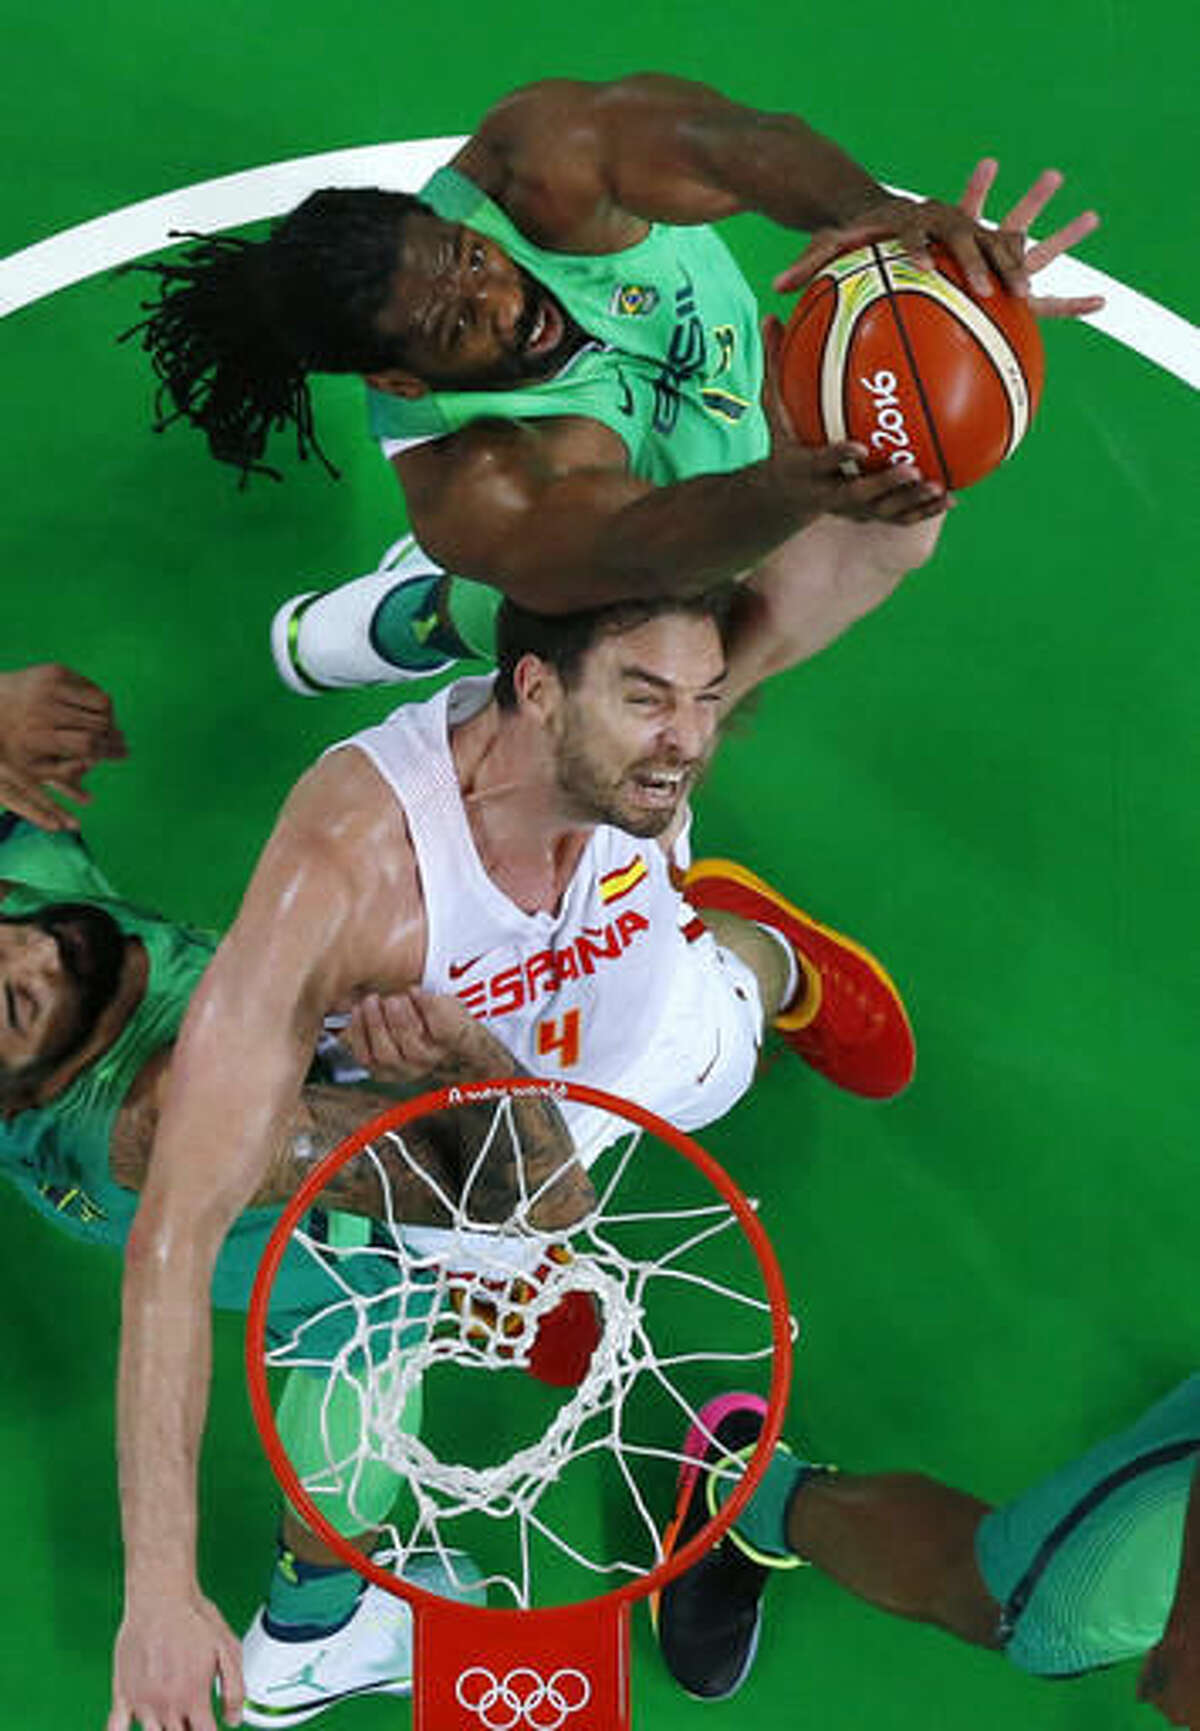 Spain's Pau Gasol (4) fights for a rebound with Brazil's Nene Hilario, top, during a basketball game at the 2016 Summer Olympics in Rio de Janeiro, Brazil, Tuesday, Aug. 9, 2016. (Jim Young/Pool Photo via AP)